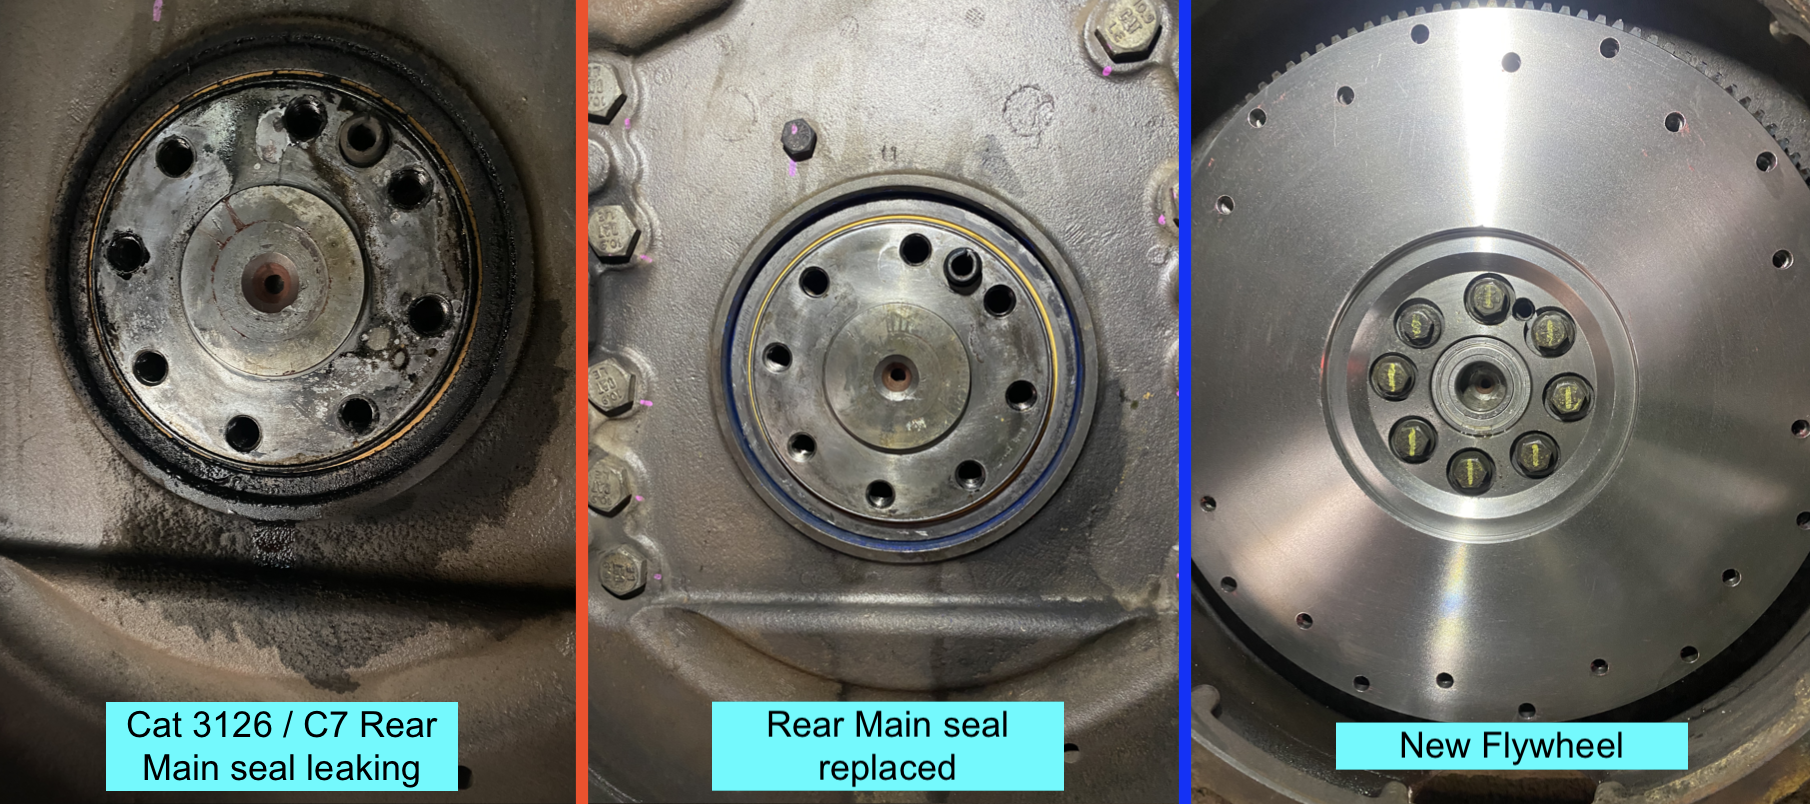 Cat 3126 C7 Rear Main Seal and Flywheel replaced